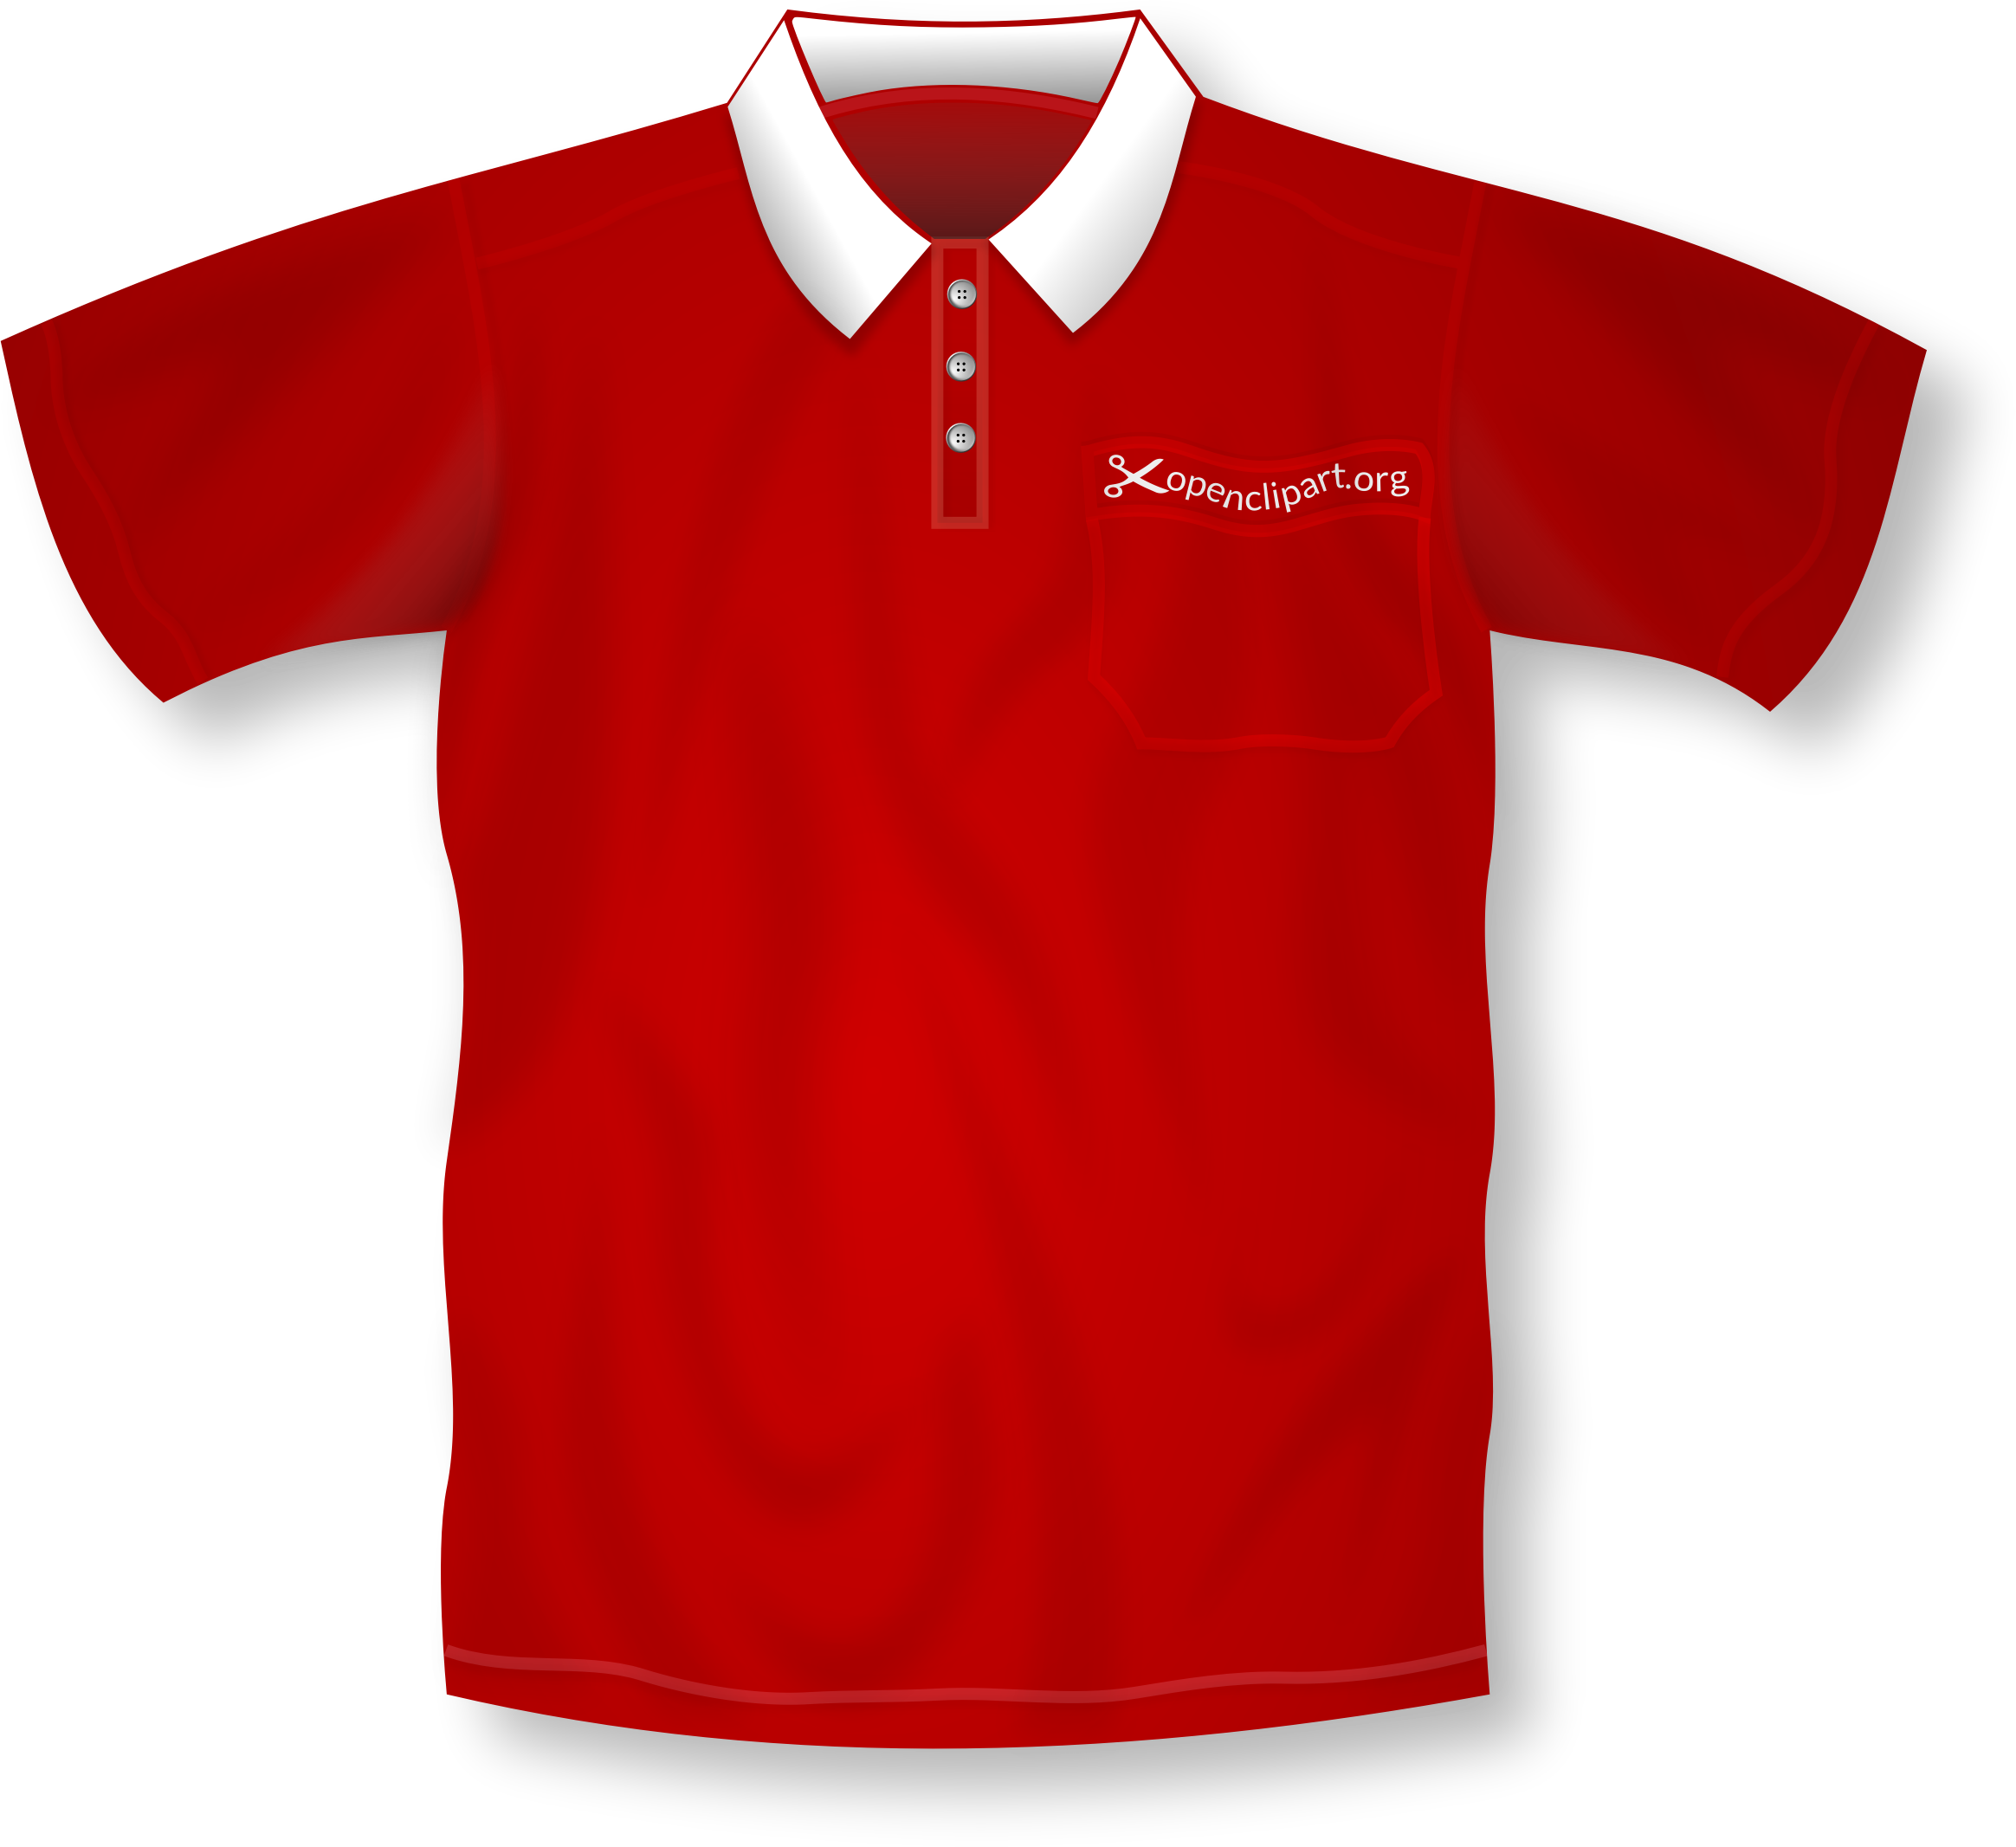 Shirt clipart uniform.  collection of red